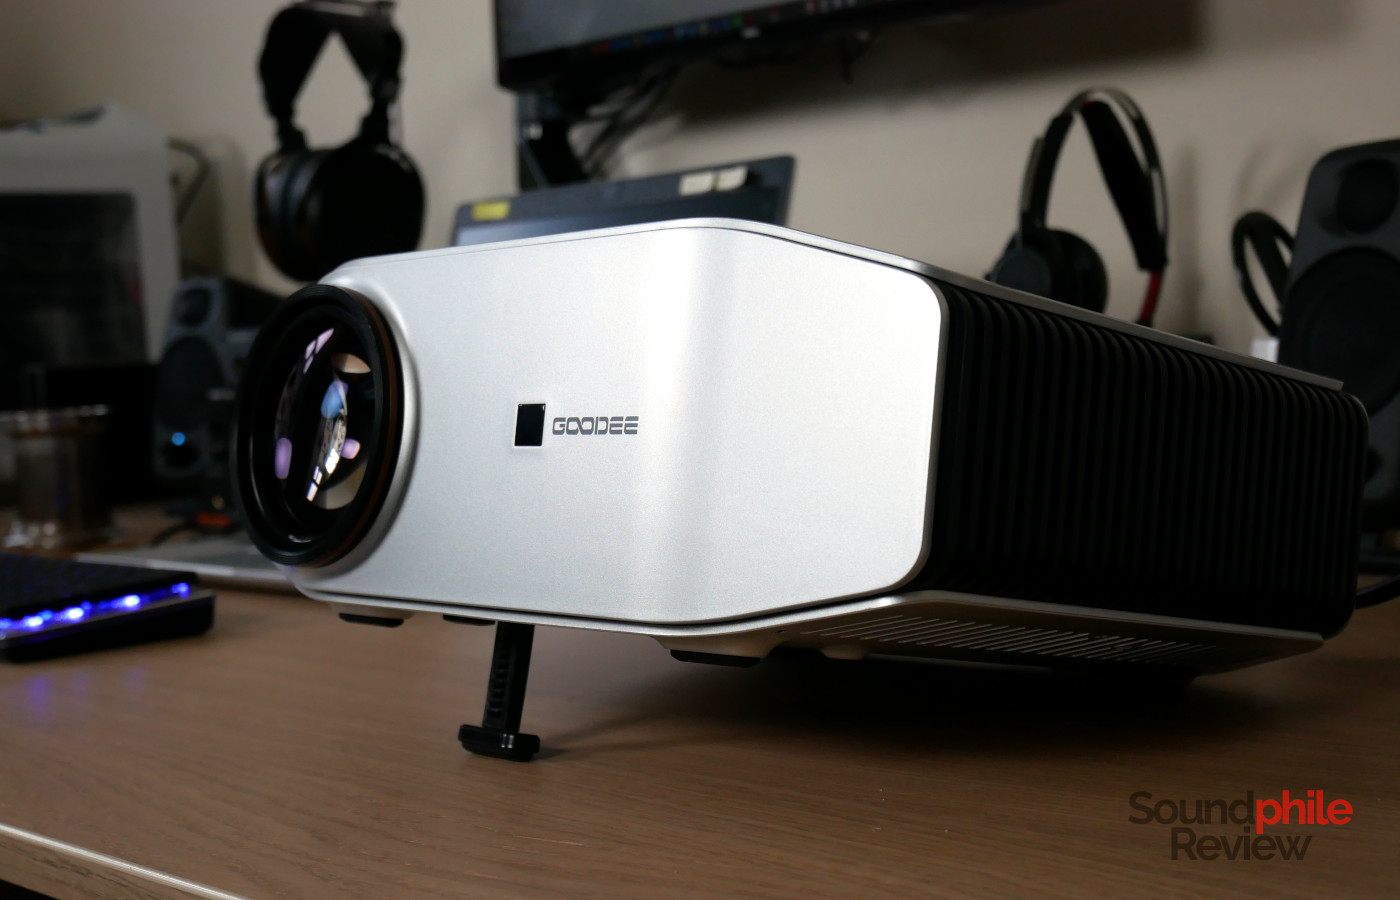 Goodee YG620 review: a good projector, but at a price